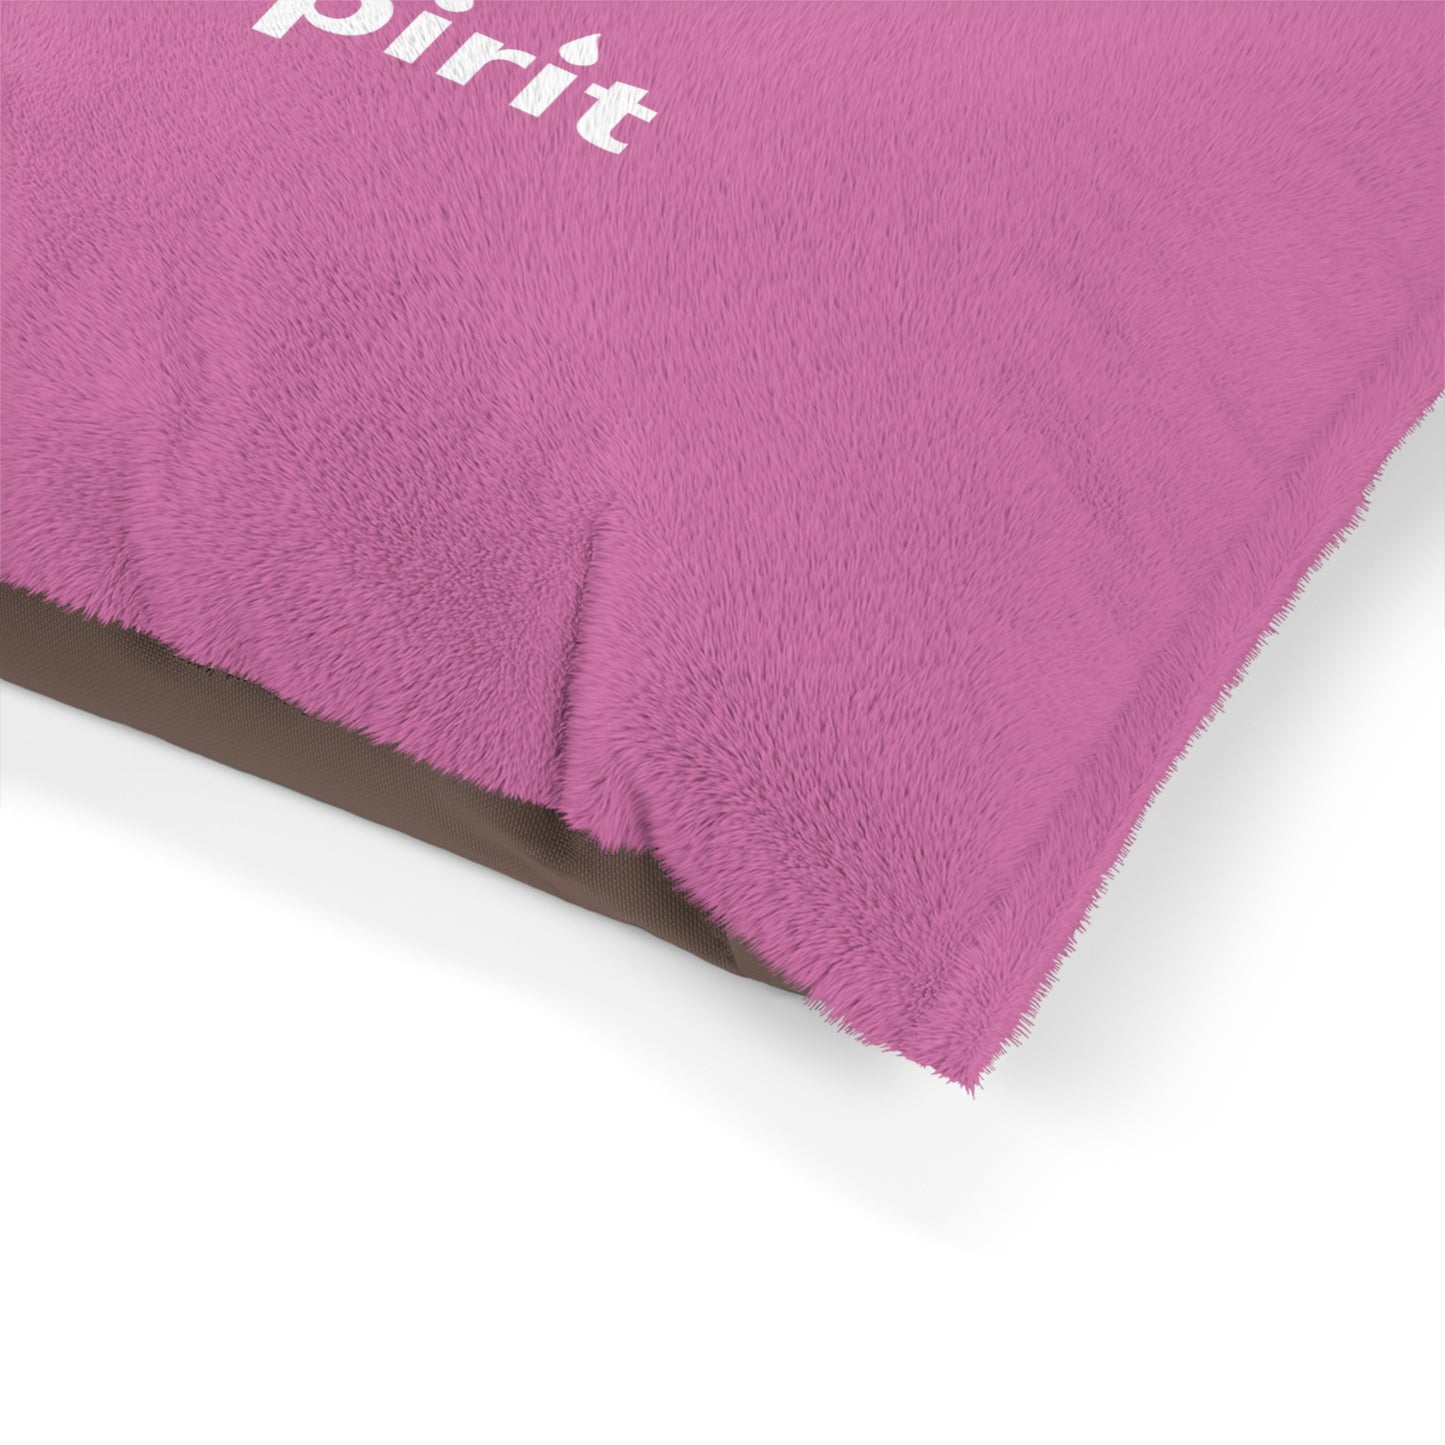 Light Pink Stay In Spirit Pet Bed